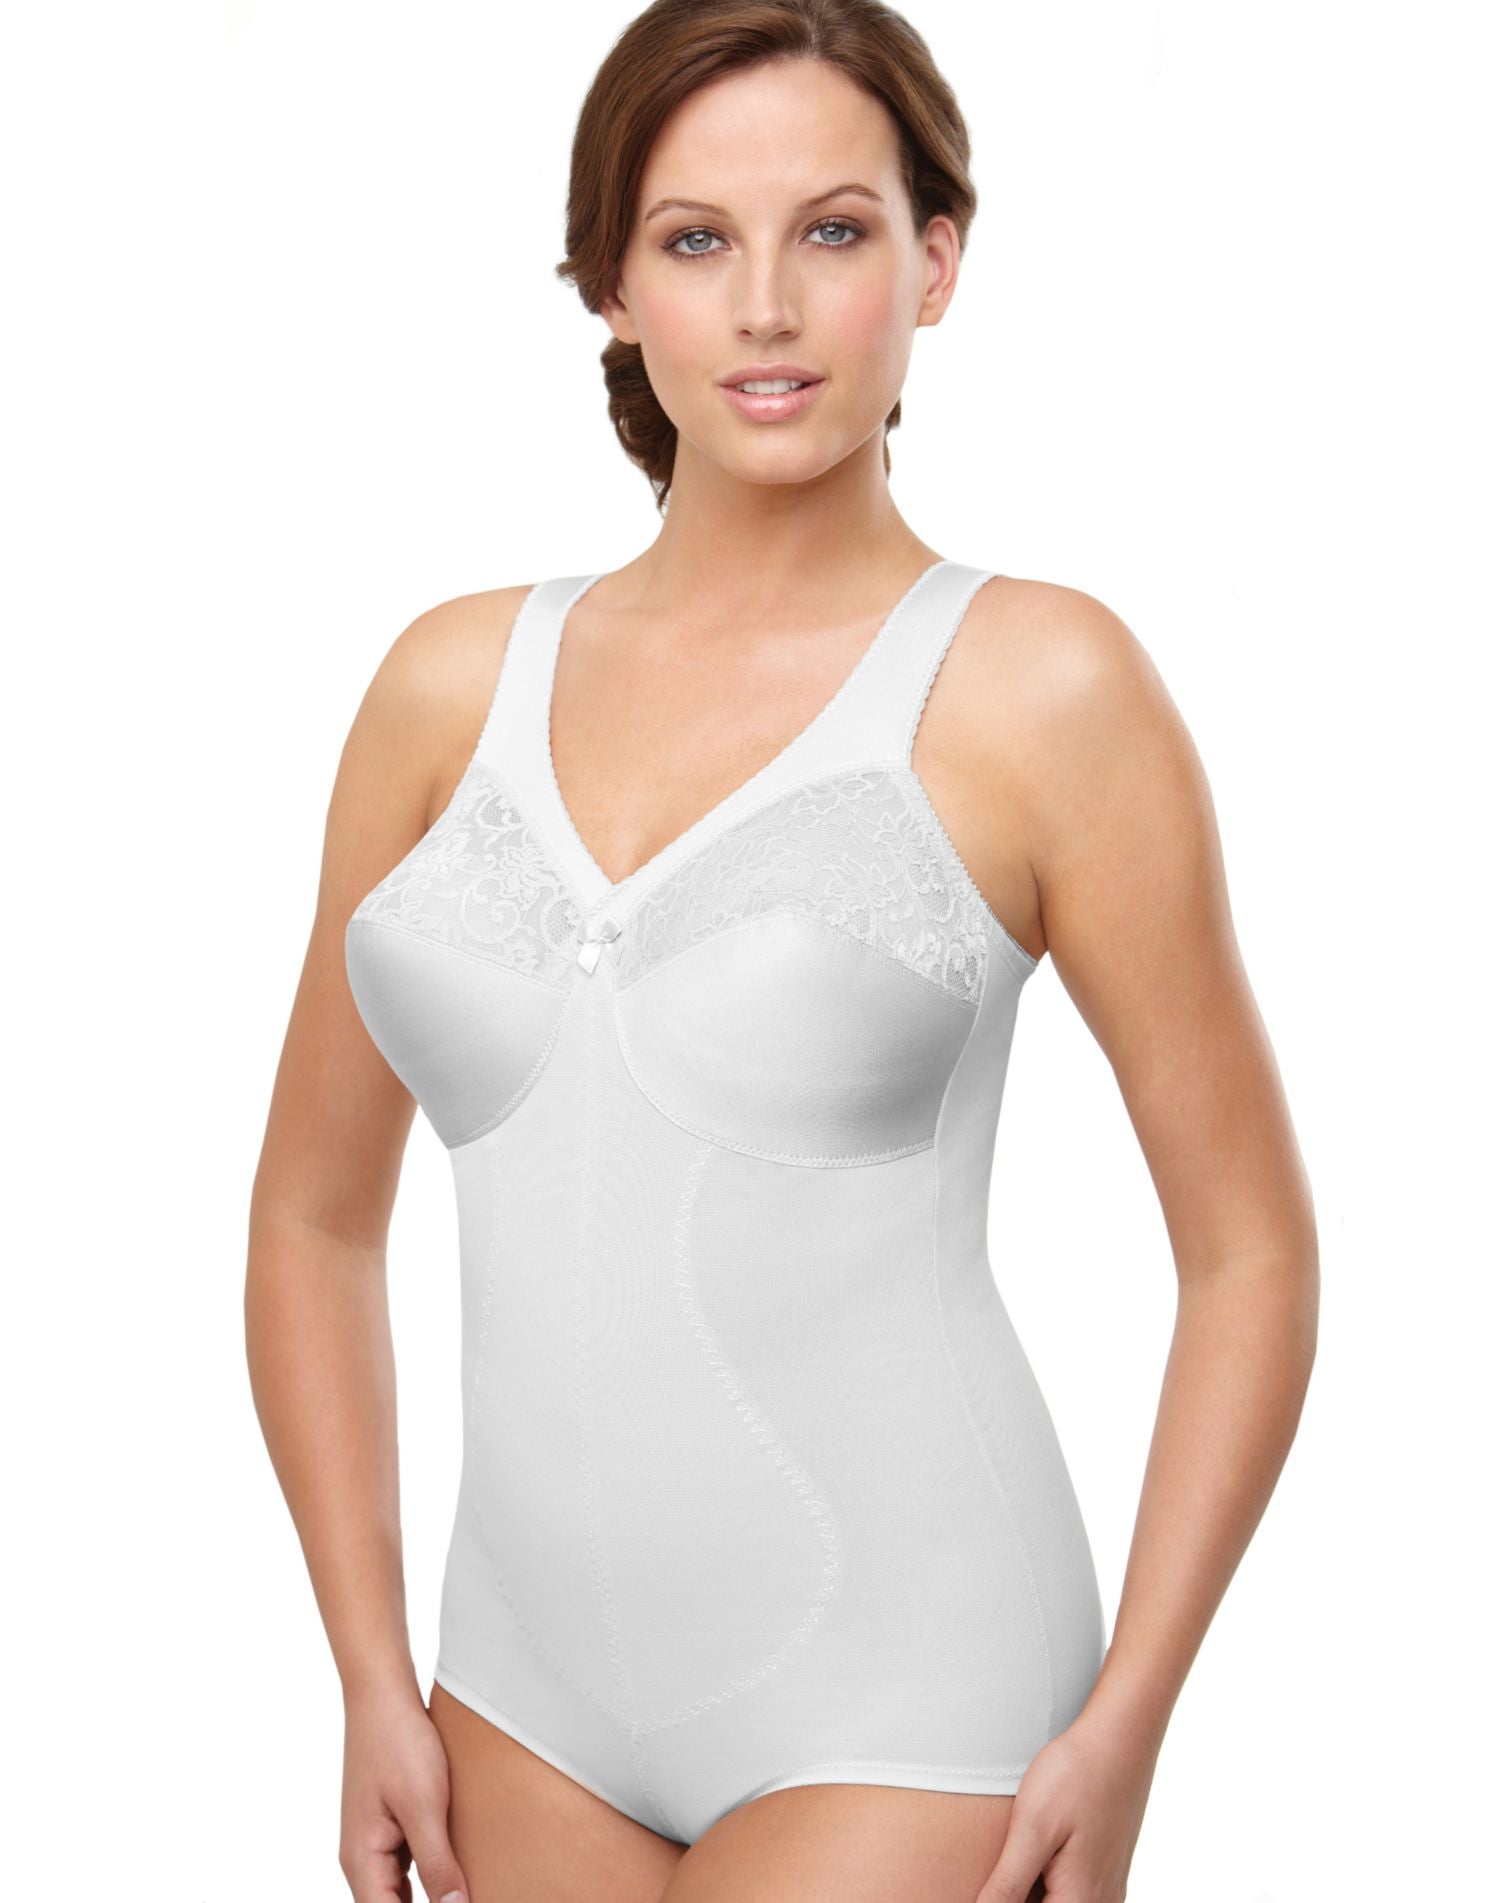 20616 - Glamorise Magic Lift All-in-One Body Briefer